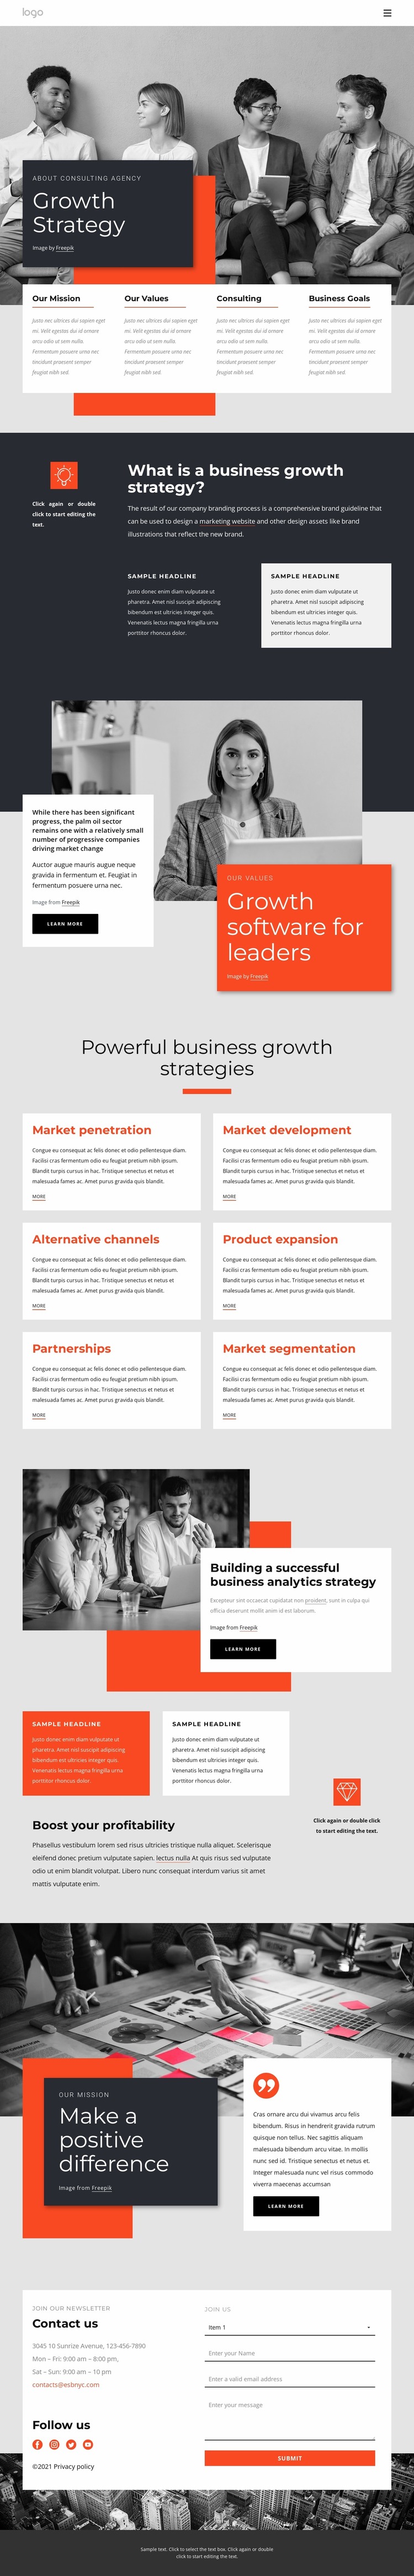 Growth strategy consultants Website Mockup